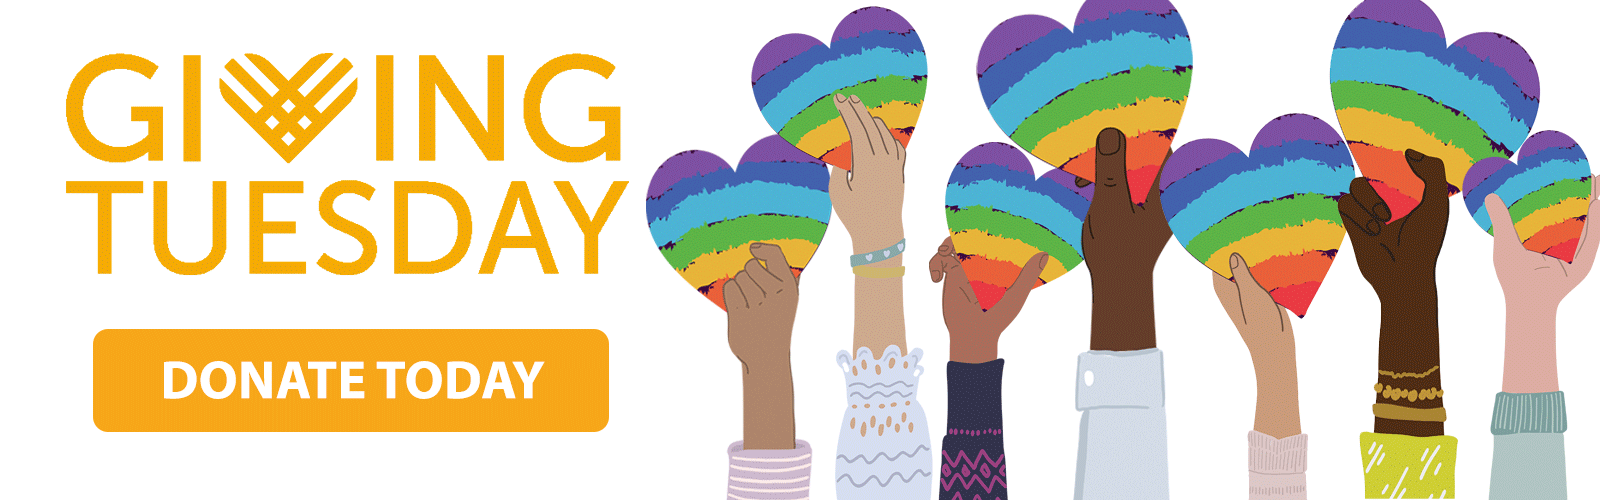 Illustration of hands holding rainbow hearts. Yellow text to the left that says "Giving Tuesday. Donate today"